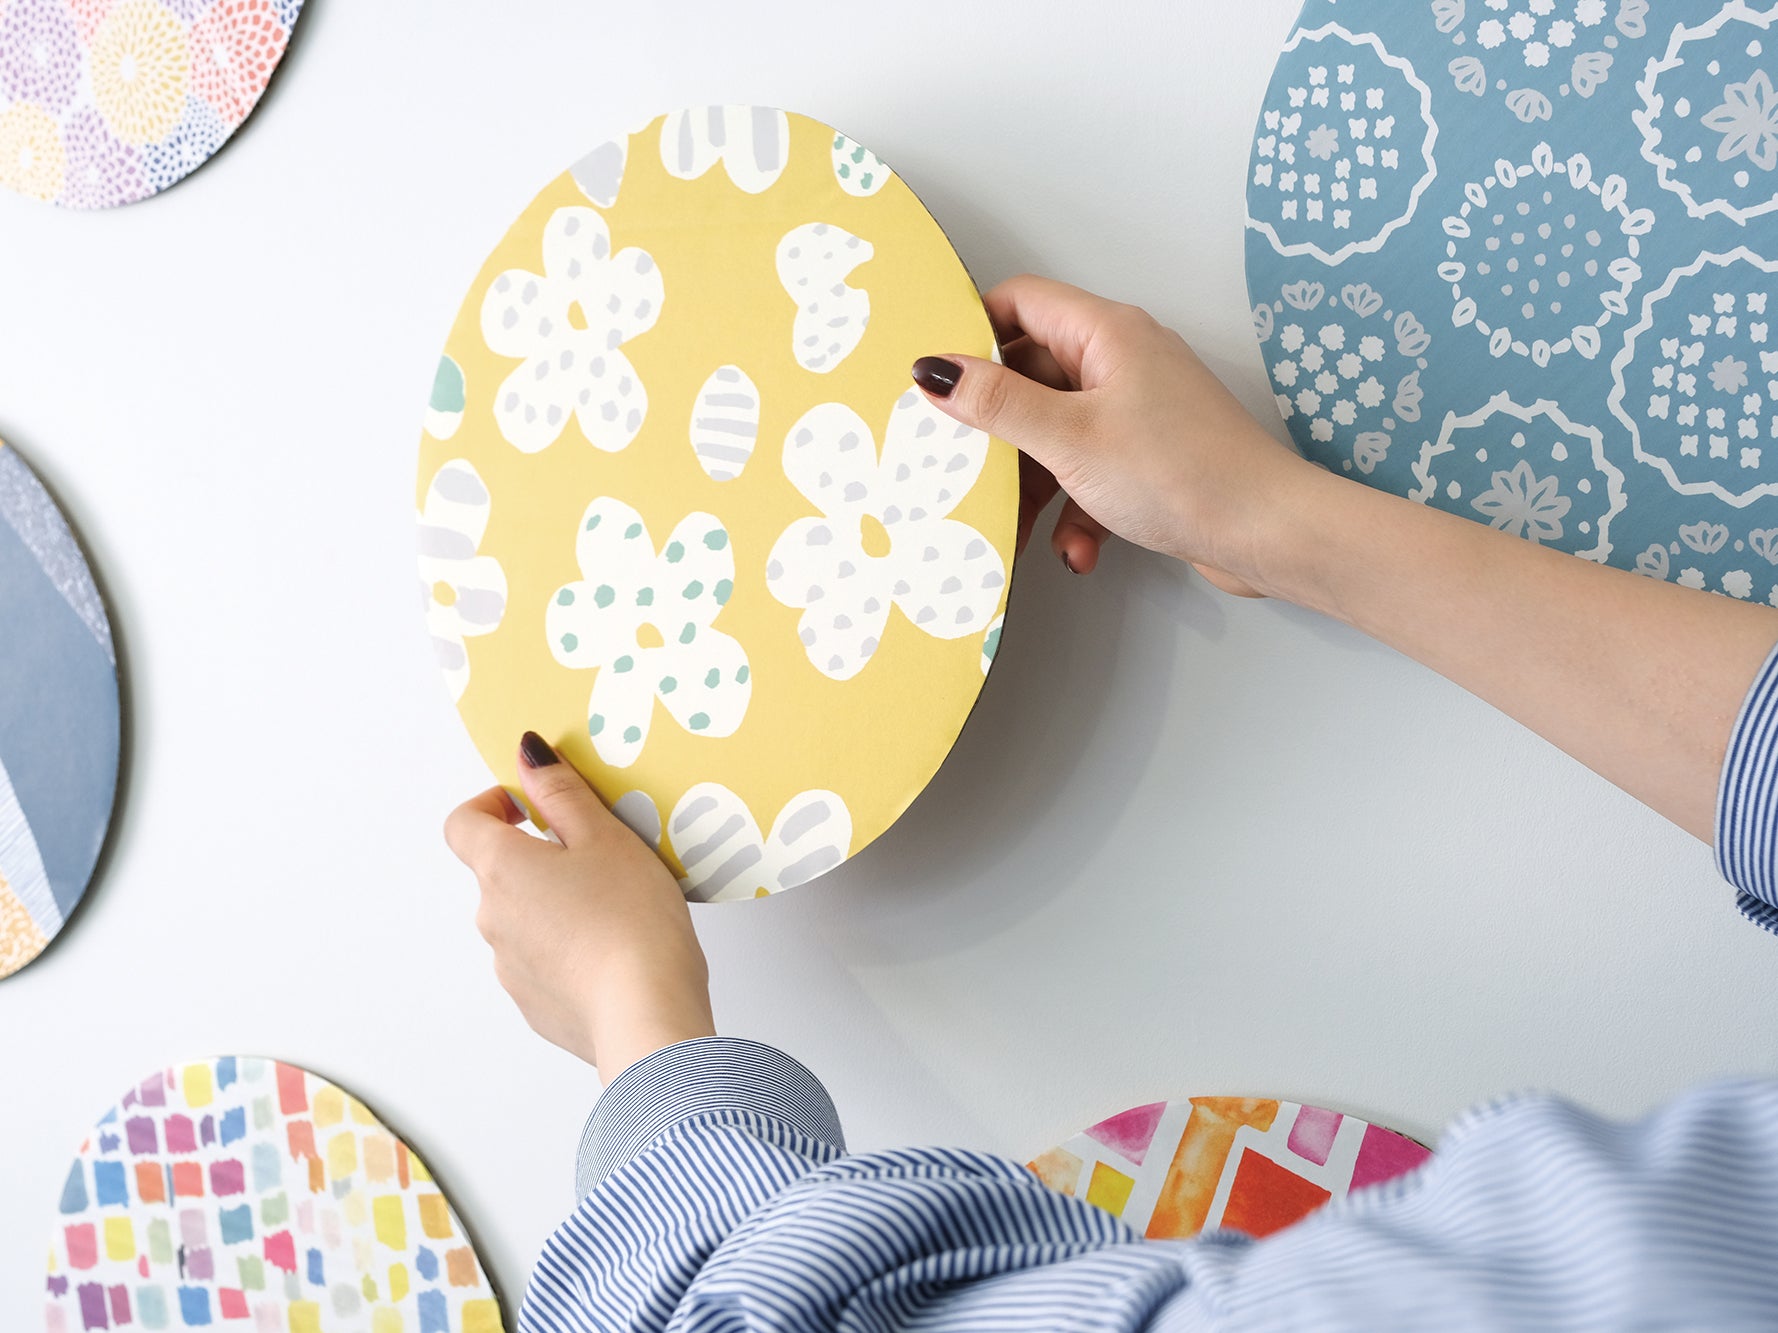 5 Creative Ways to Use Washi Tape in Your Home Decor